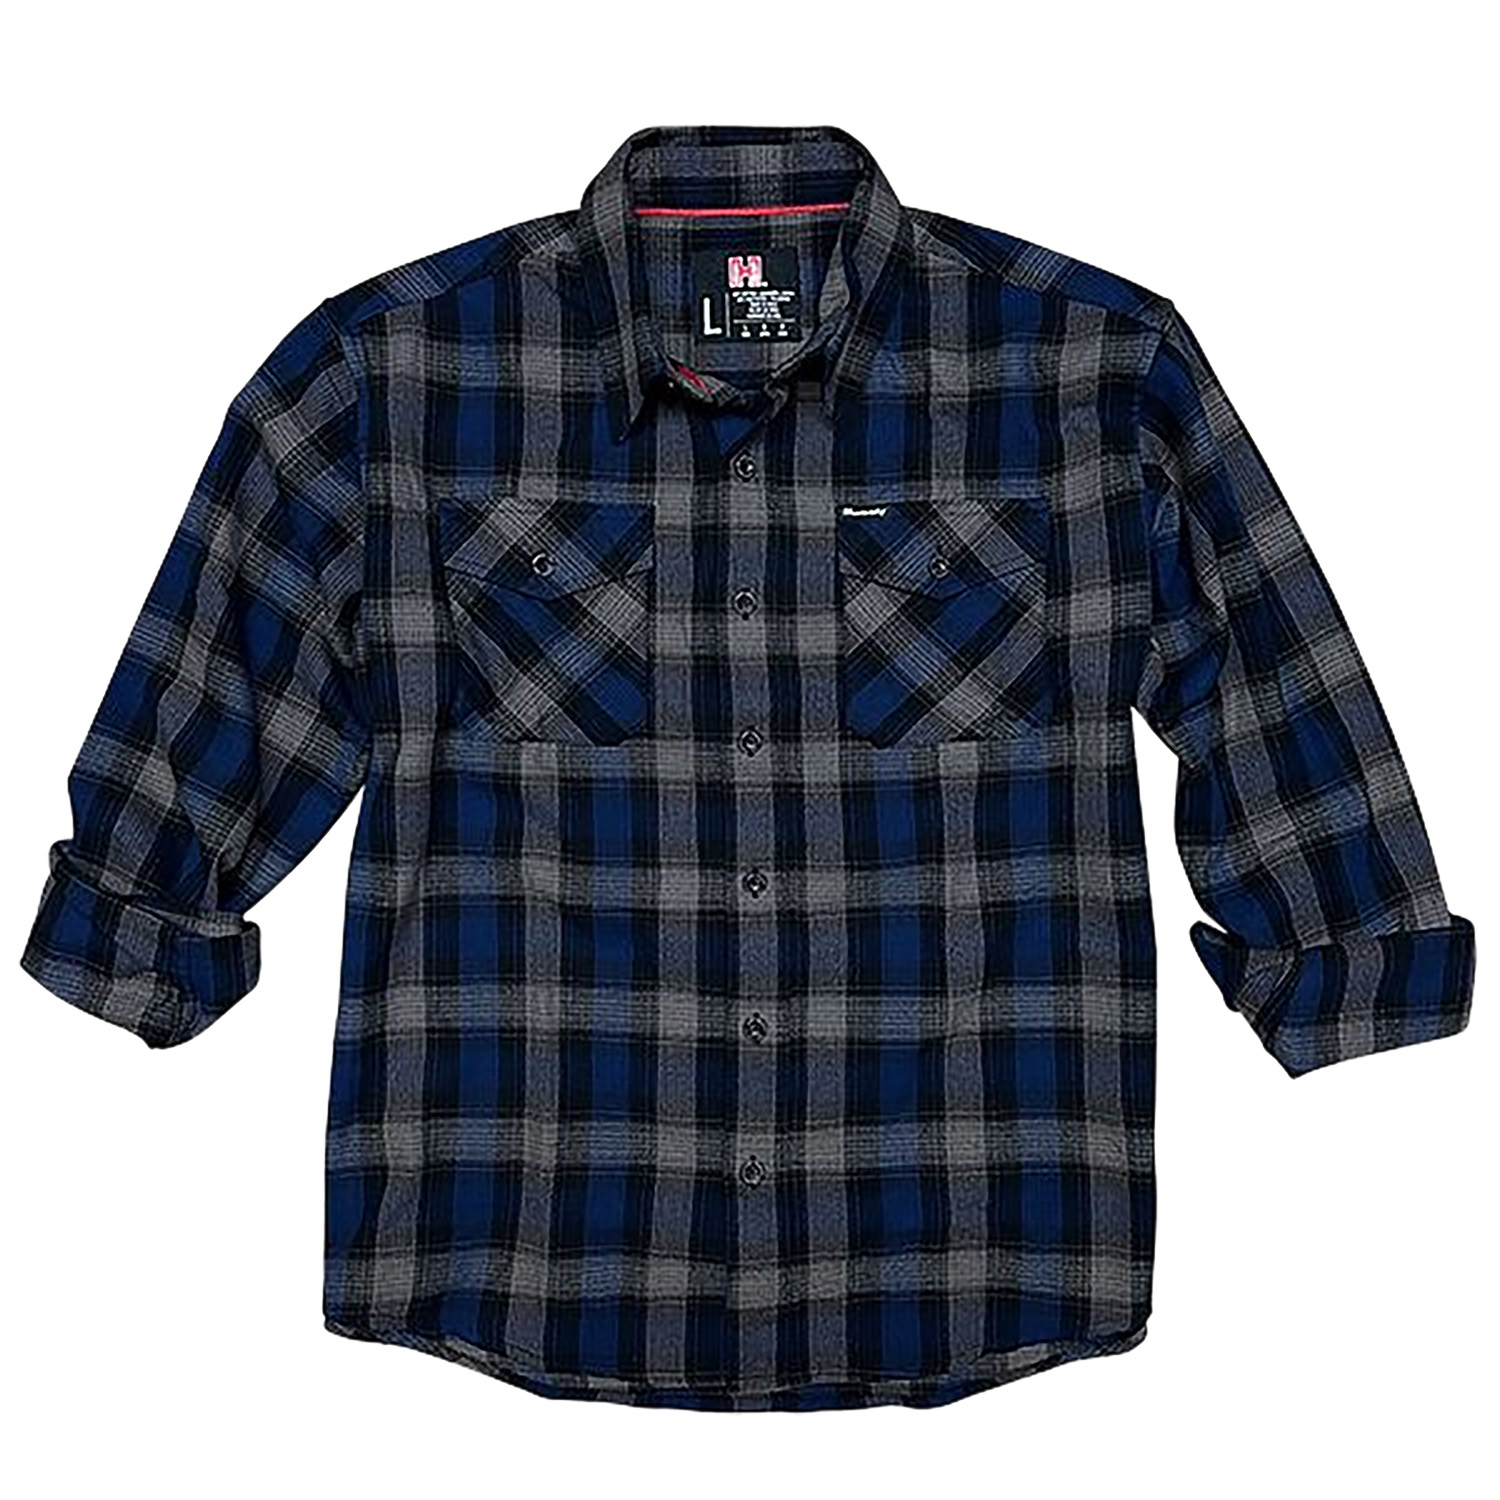 Hornady Gear 32206 Flannel Shirt 3Xl Navy/Black/Gray, Cotton/Polyester, Relaxed Fit Button Up